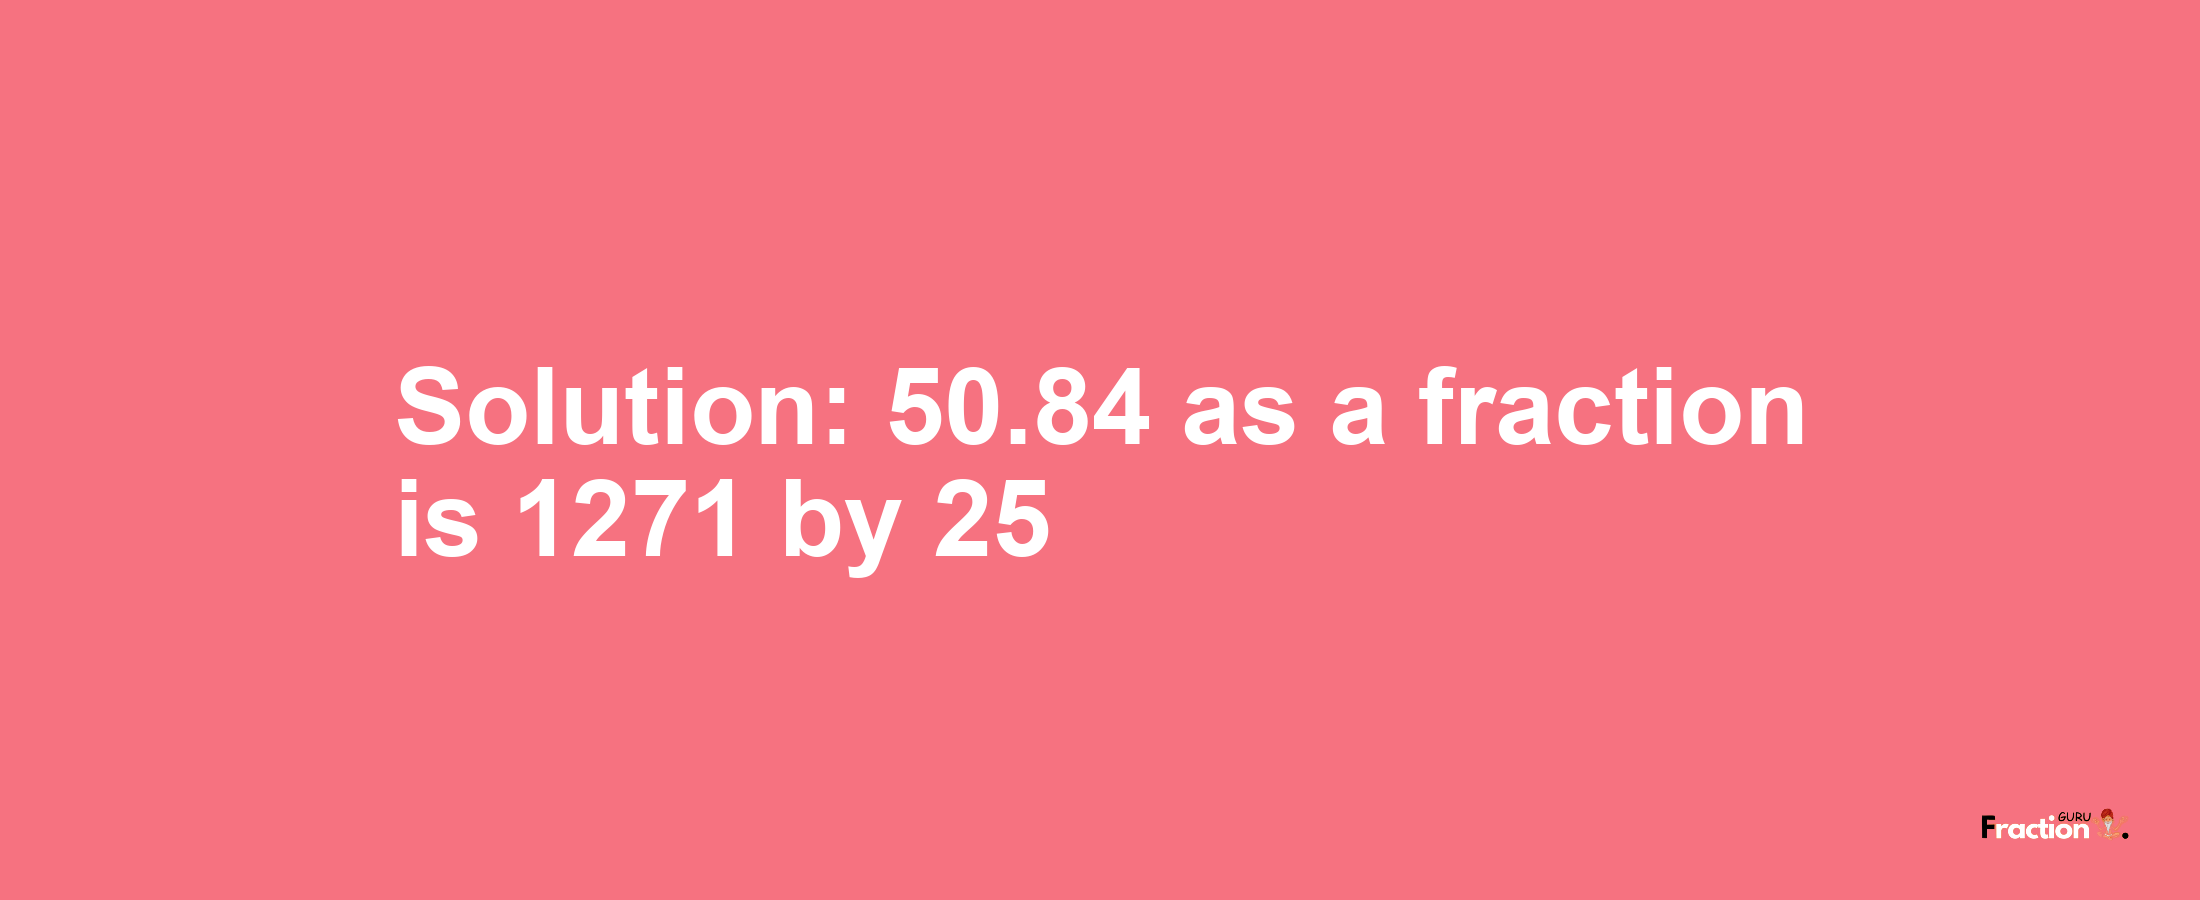 Solution:50.84 as a fraction is 1271/25